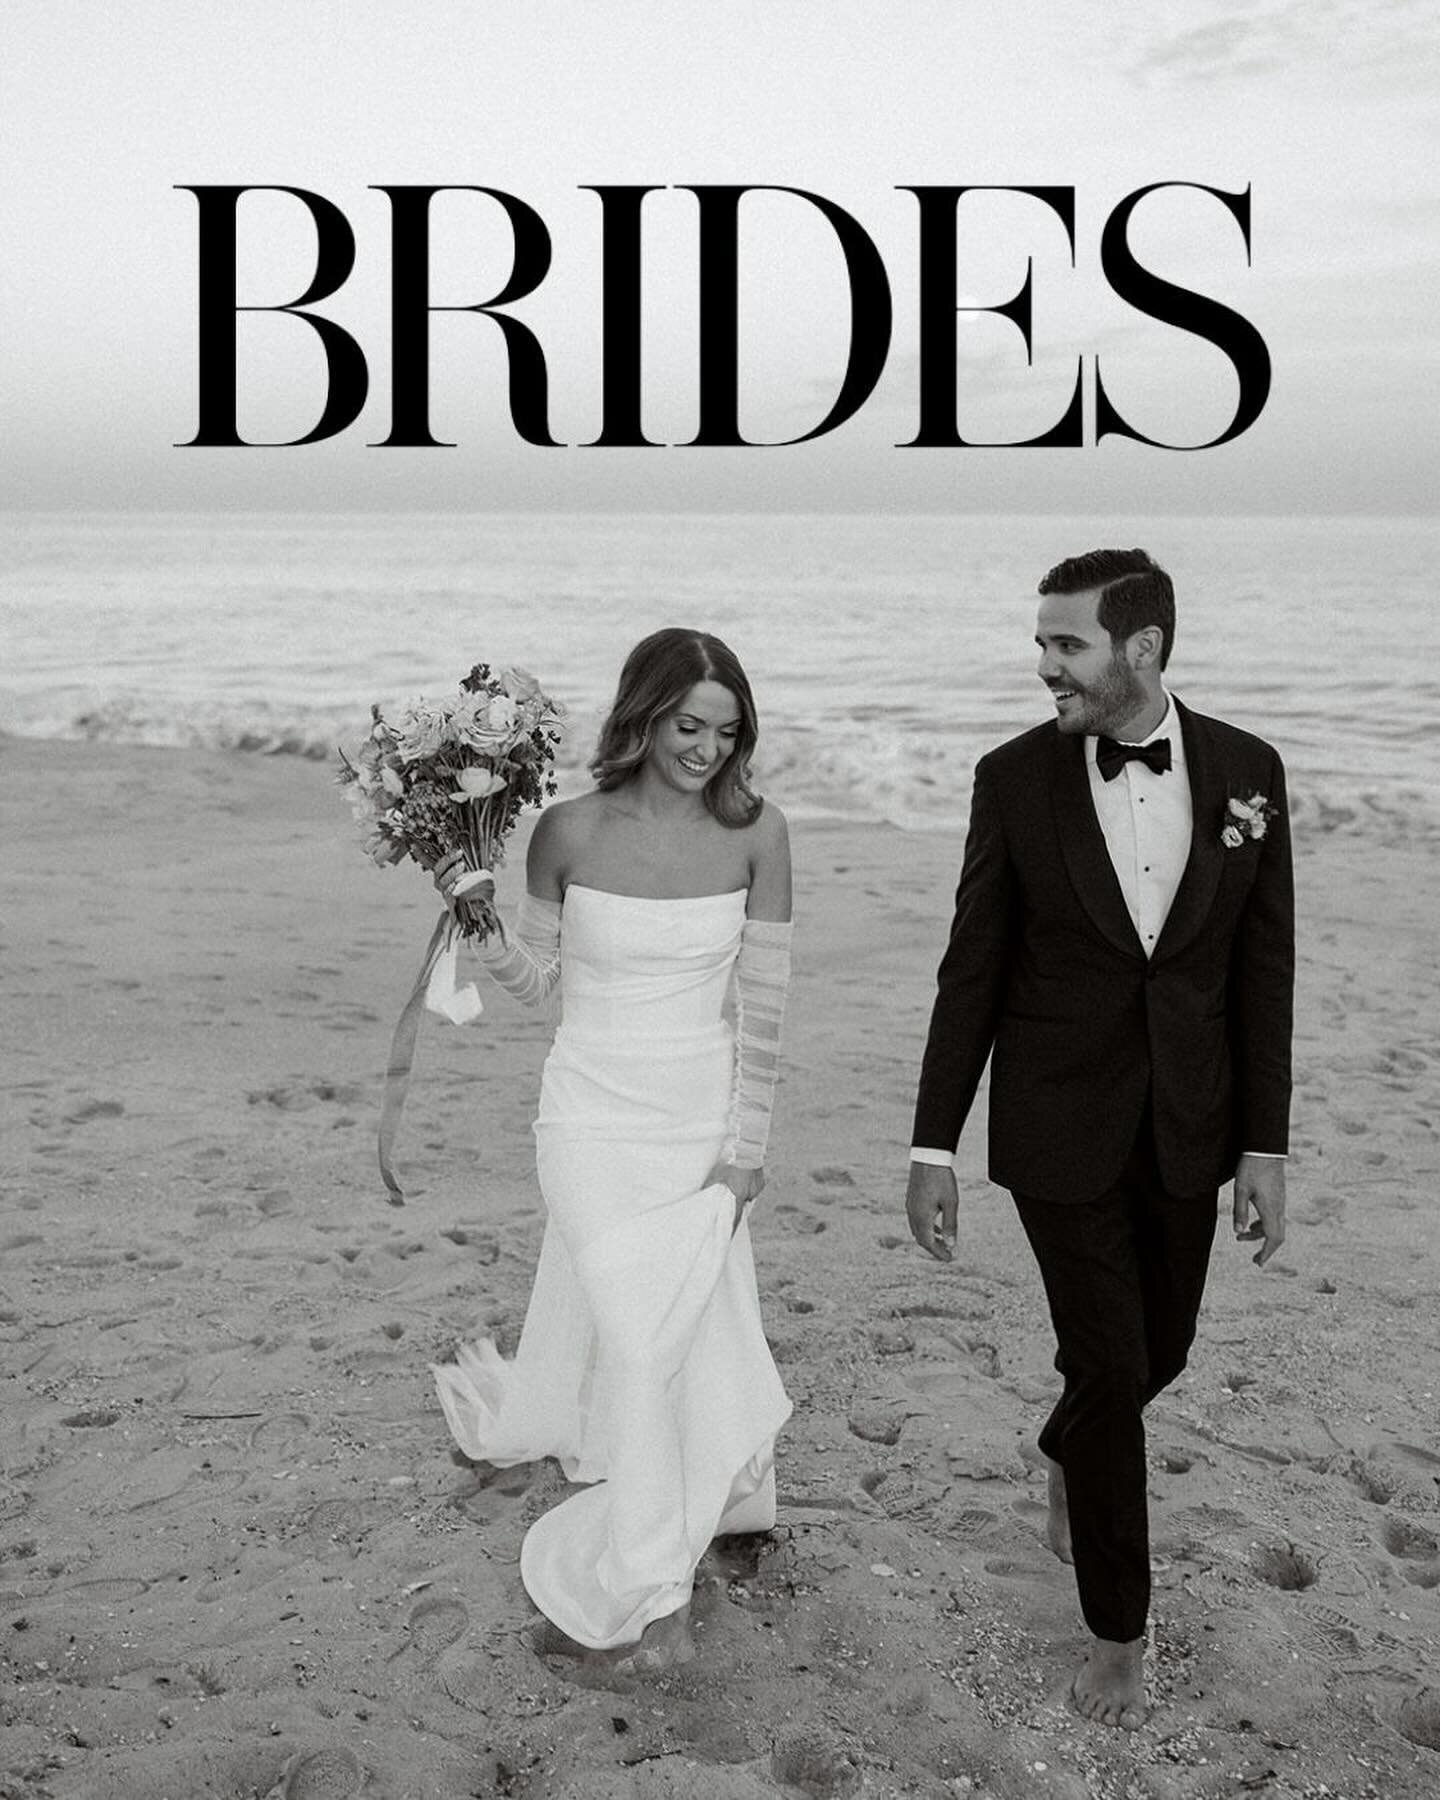 Stroll on the beach with Alyssa + Nick, now featured on @brides! Link in bio to see more.